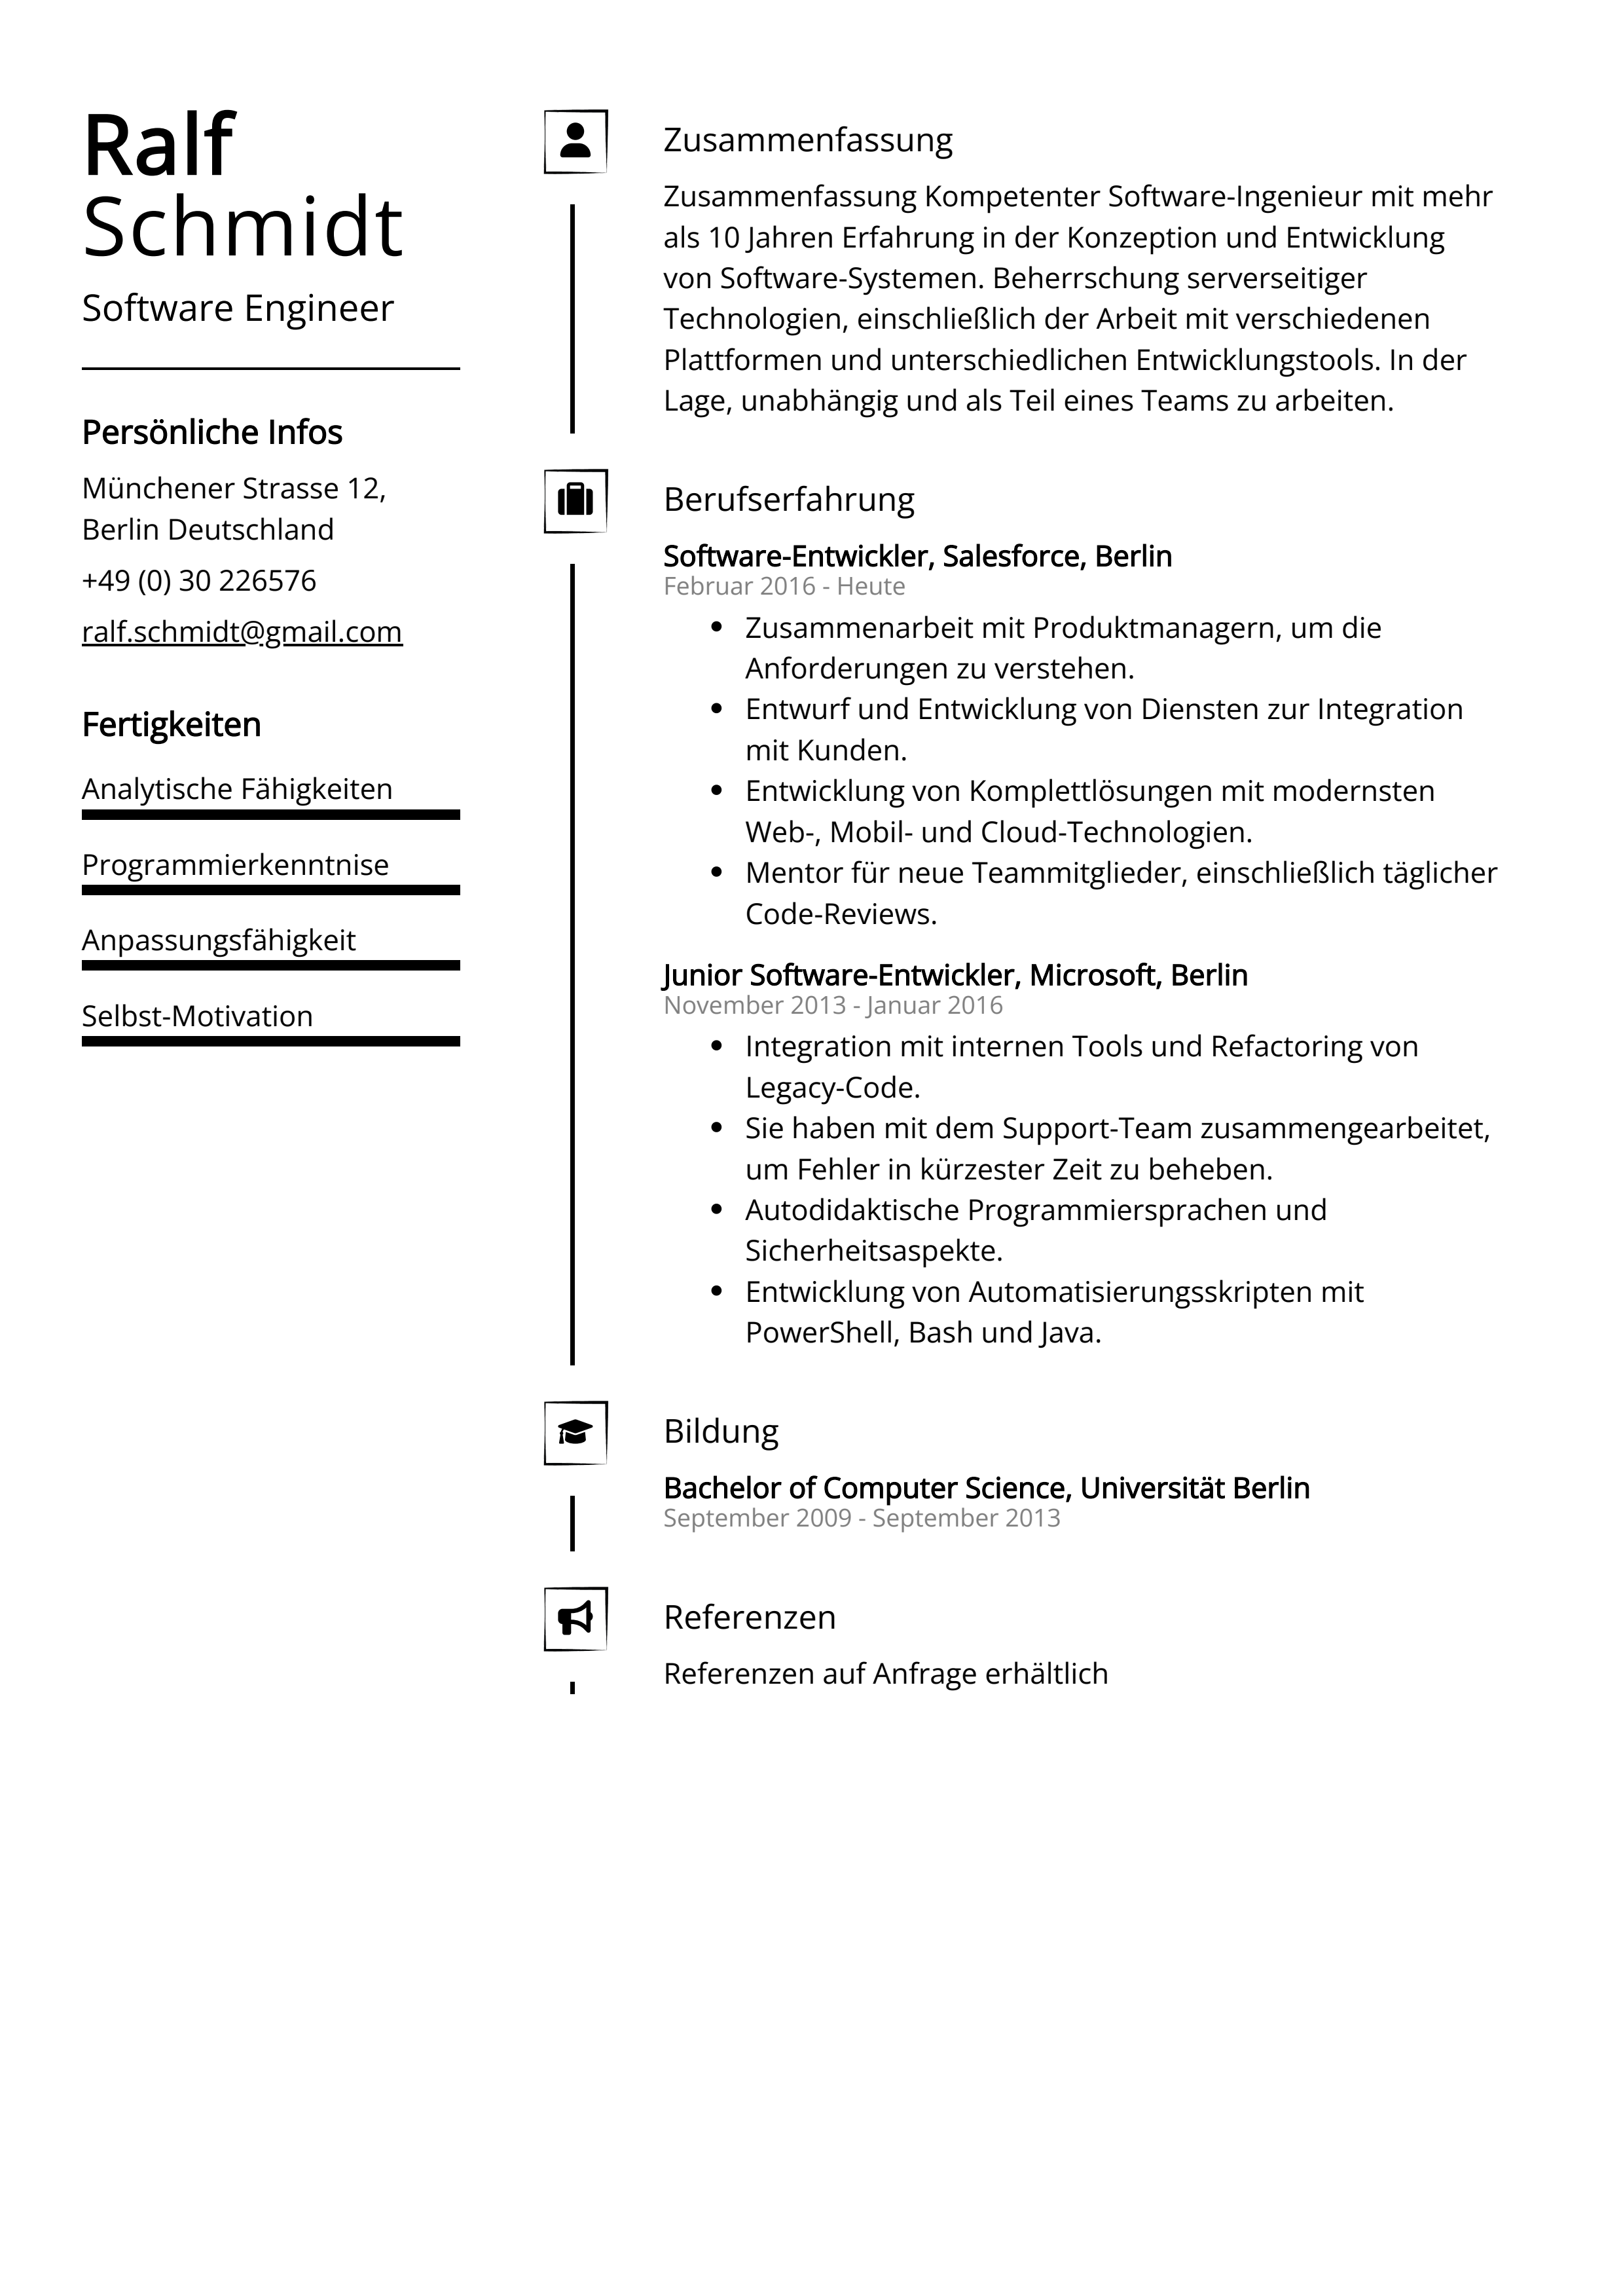 assets/components/resume examples/resume.png